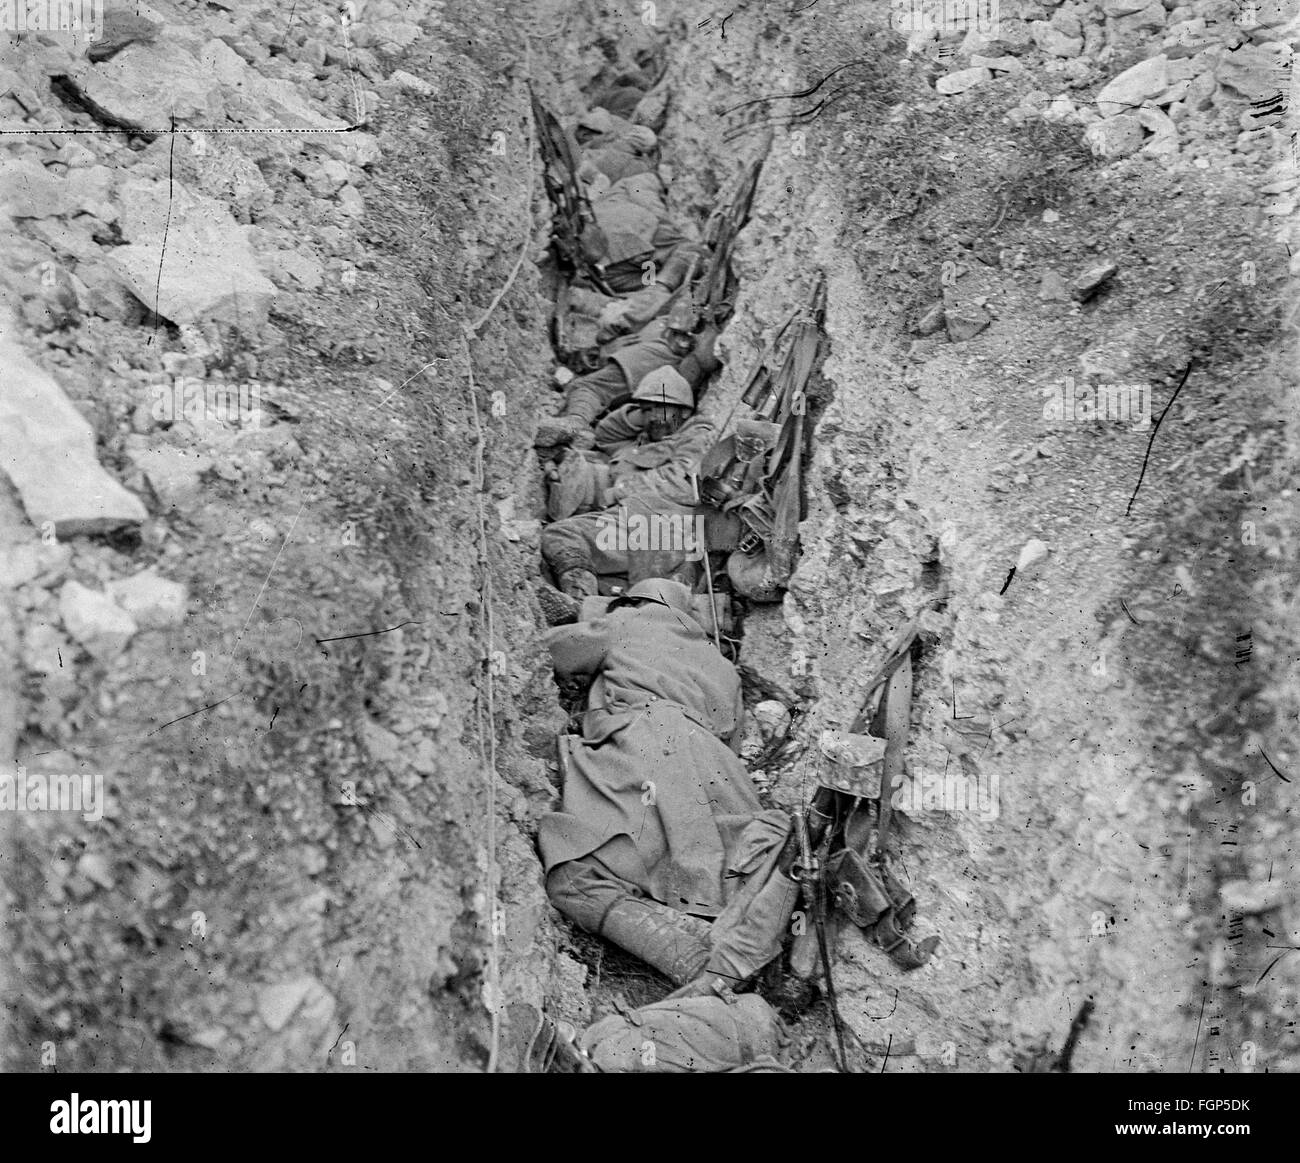 Battle of Verdun 1916 - In a trench Stock Photo